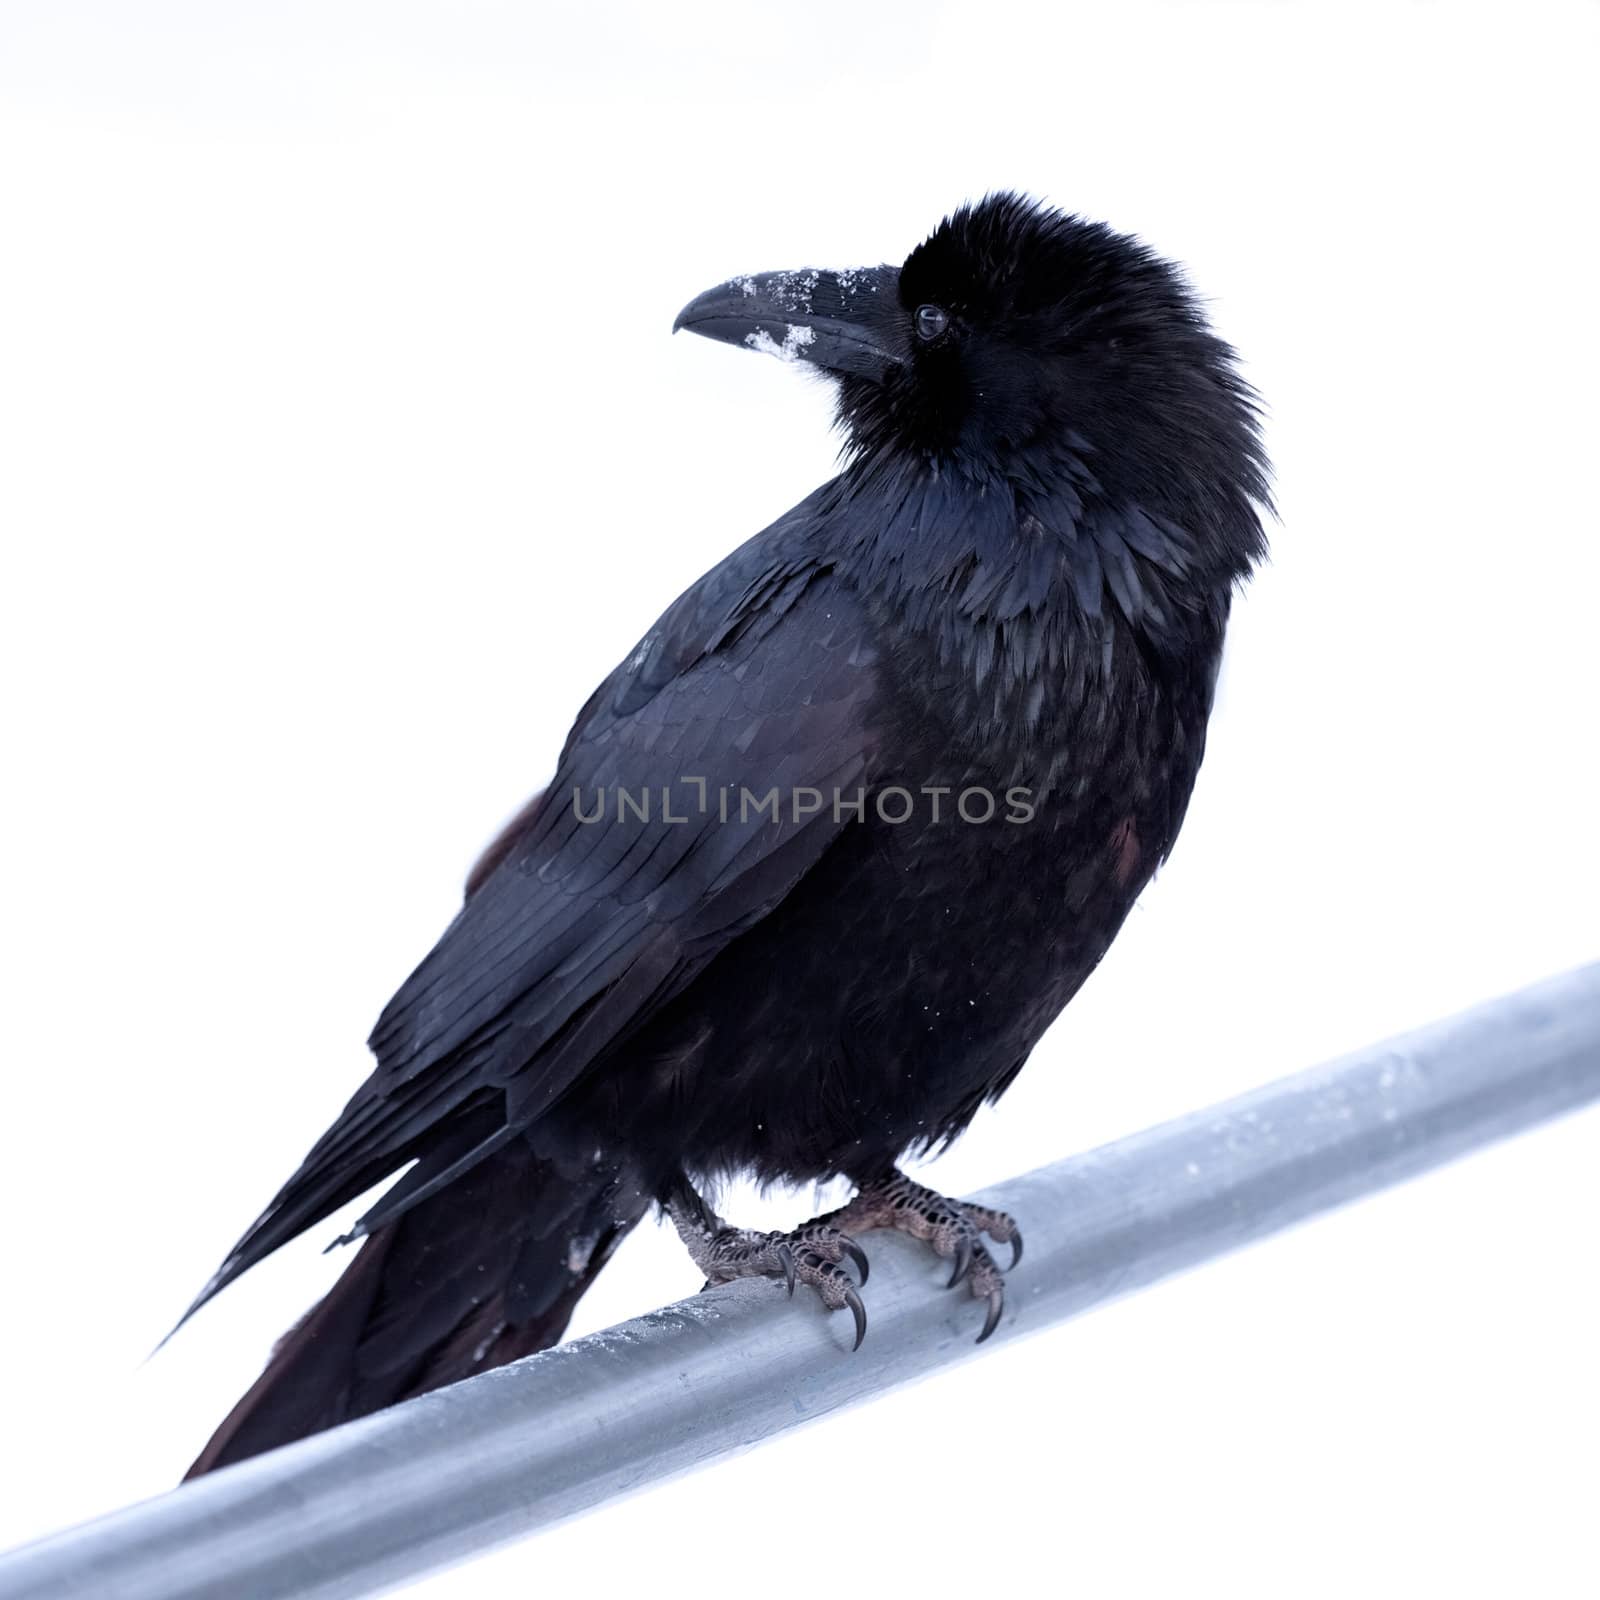 Portrait of large Common Raven Corvus corax perched on metal bar against a neutral white background